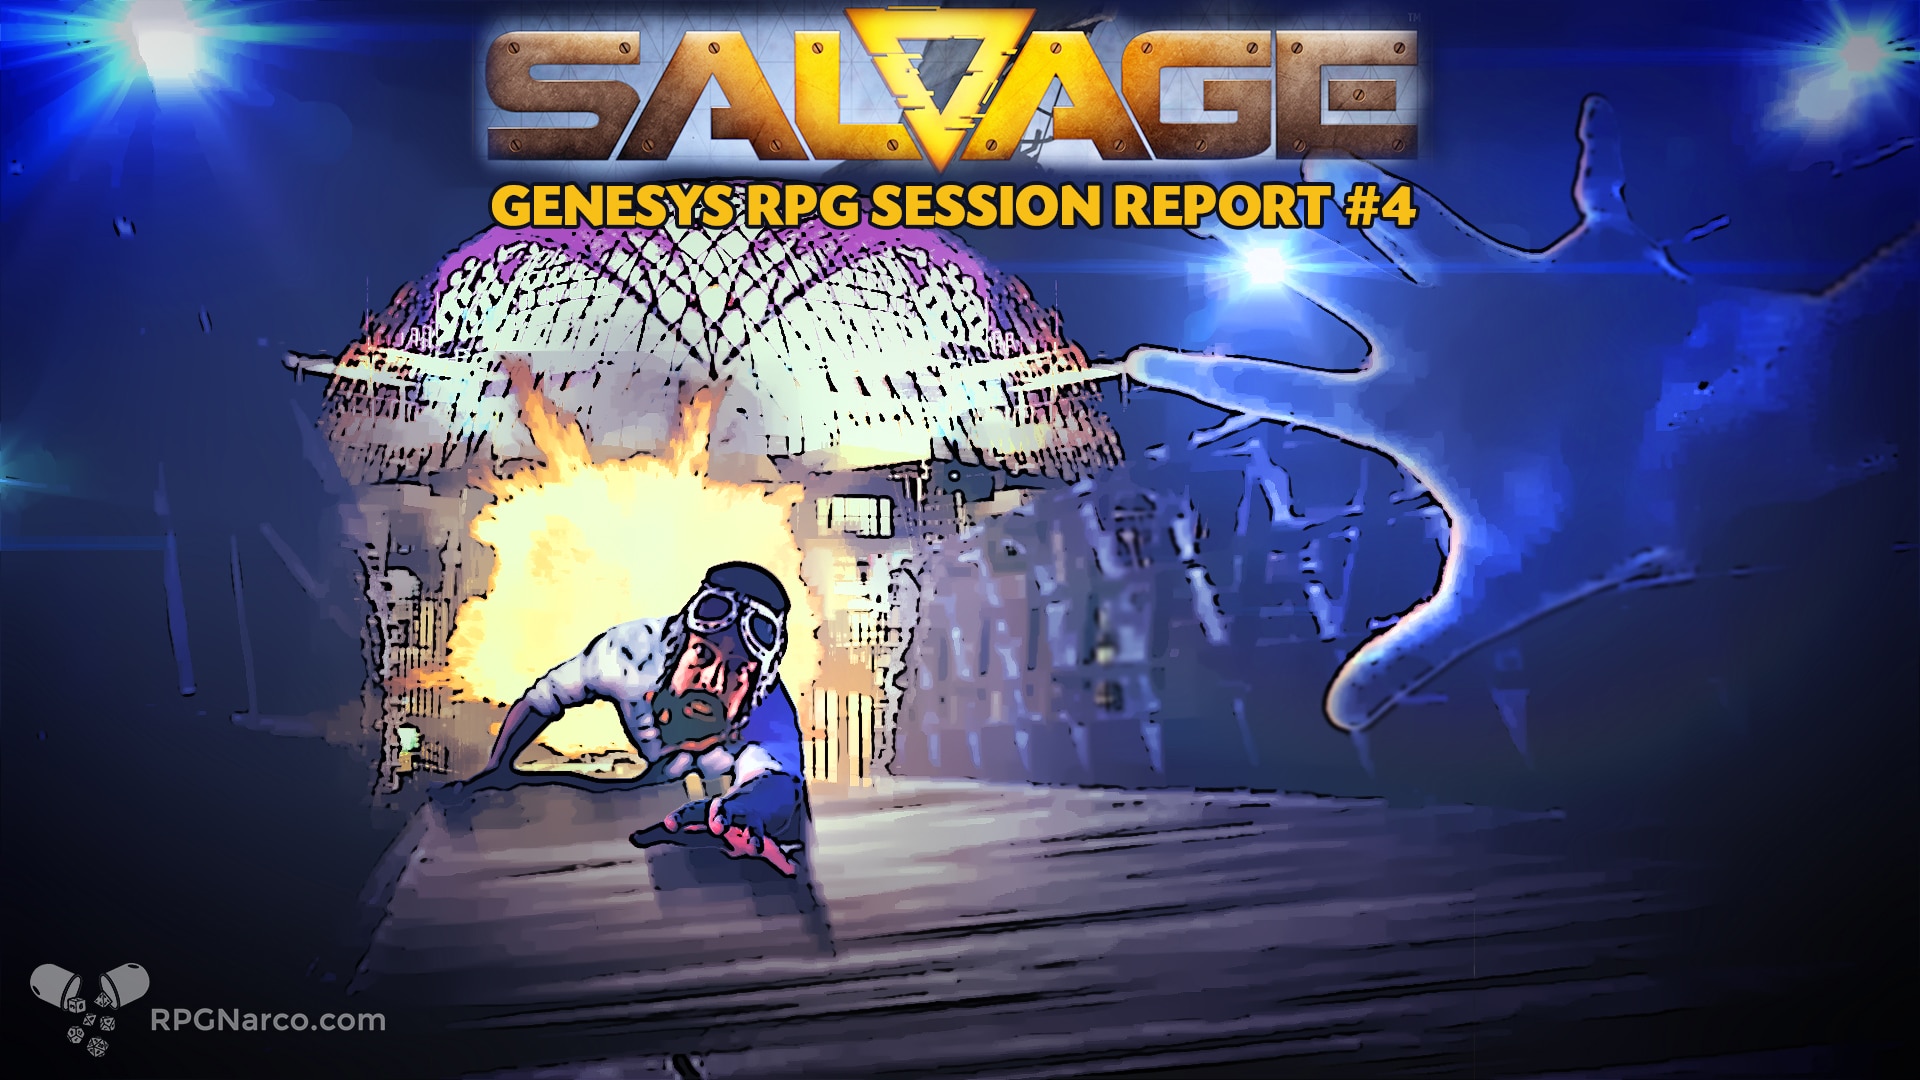 Genesys RPG Session Report – Salvage, Session 4